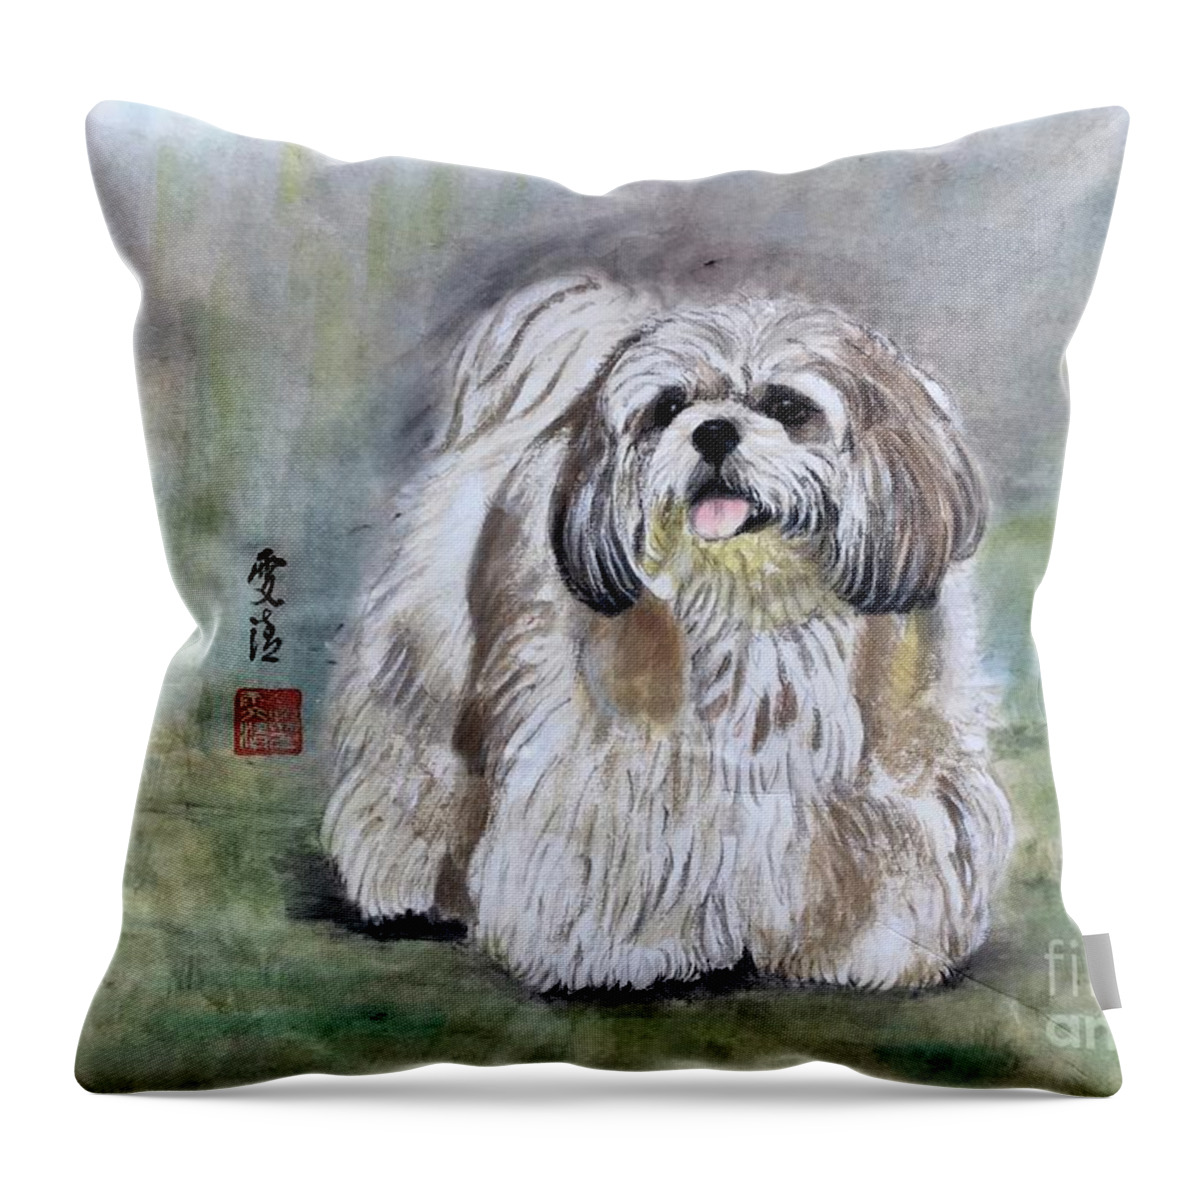 Puppy Throw Pillow featuring the painting Happy Little Puppy by Carmen Lam